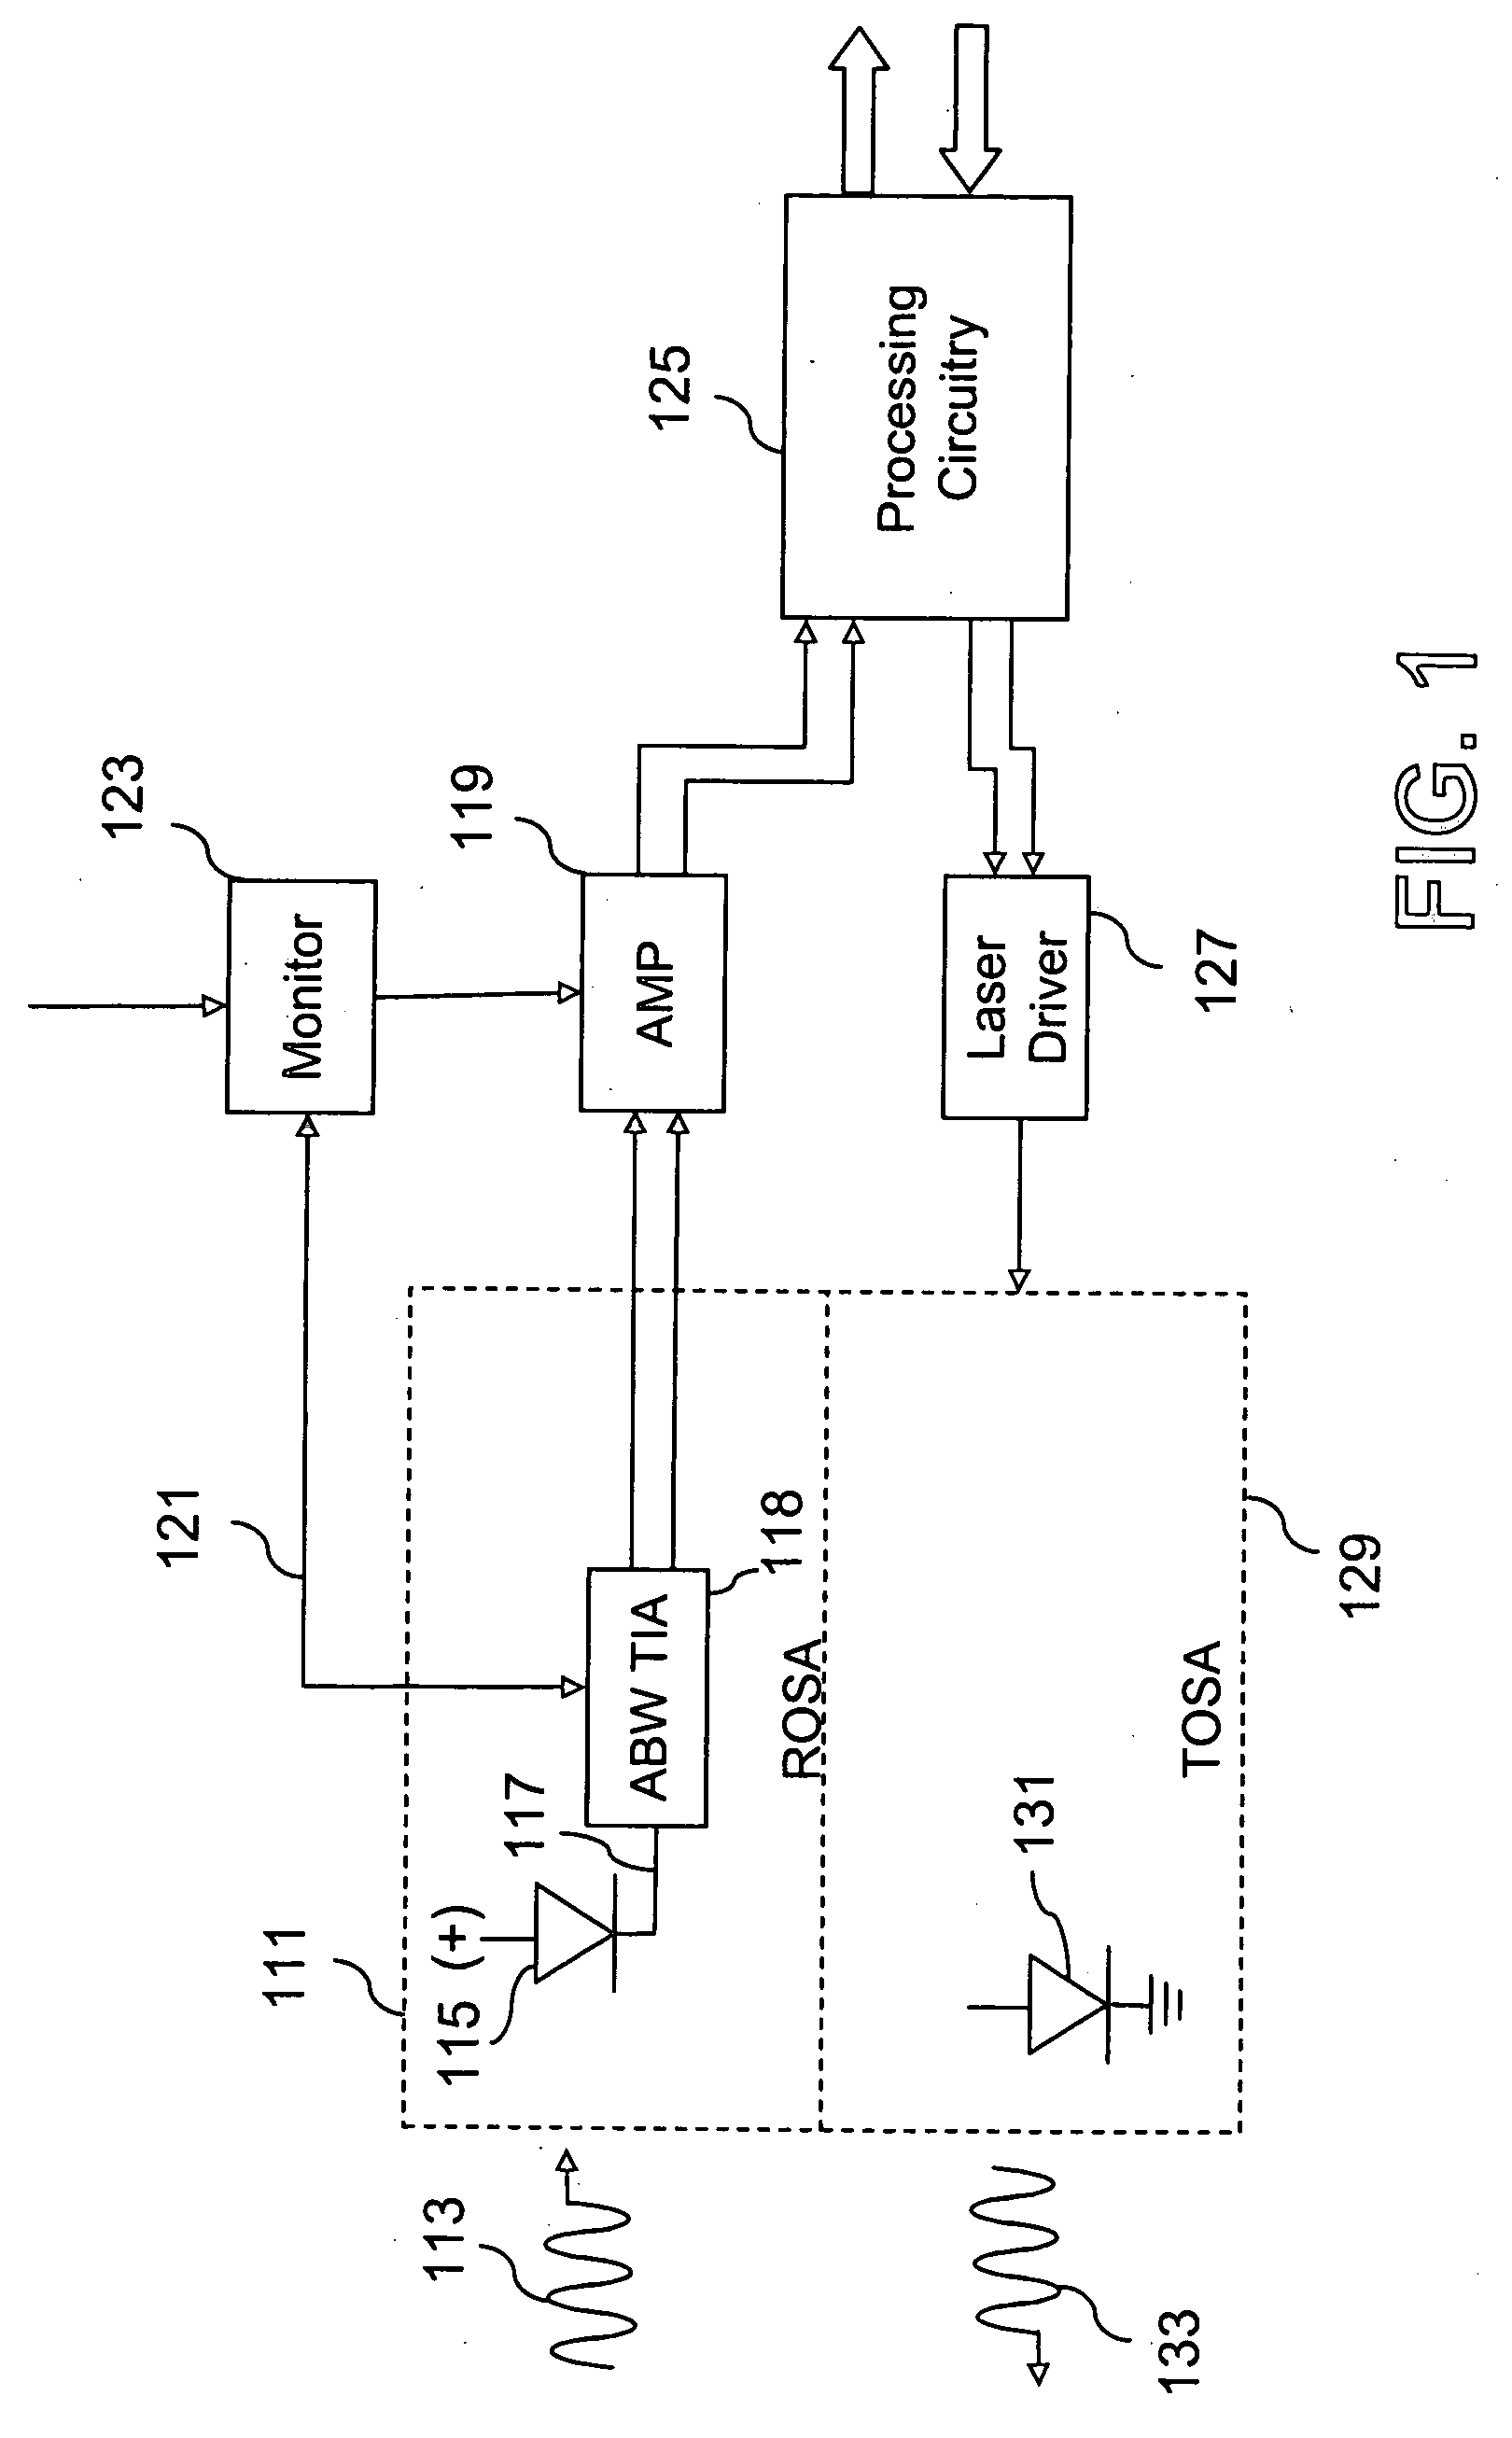 Variable bandwidth transimpedance amplifier with one-wire interface